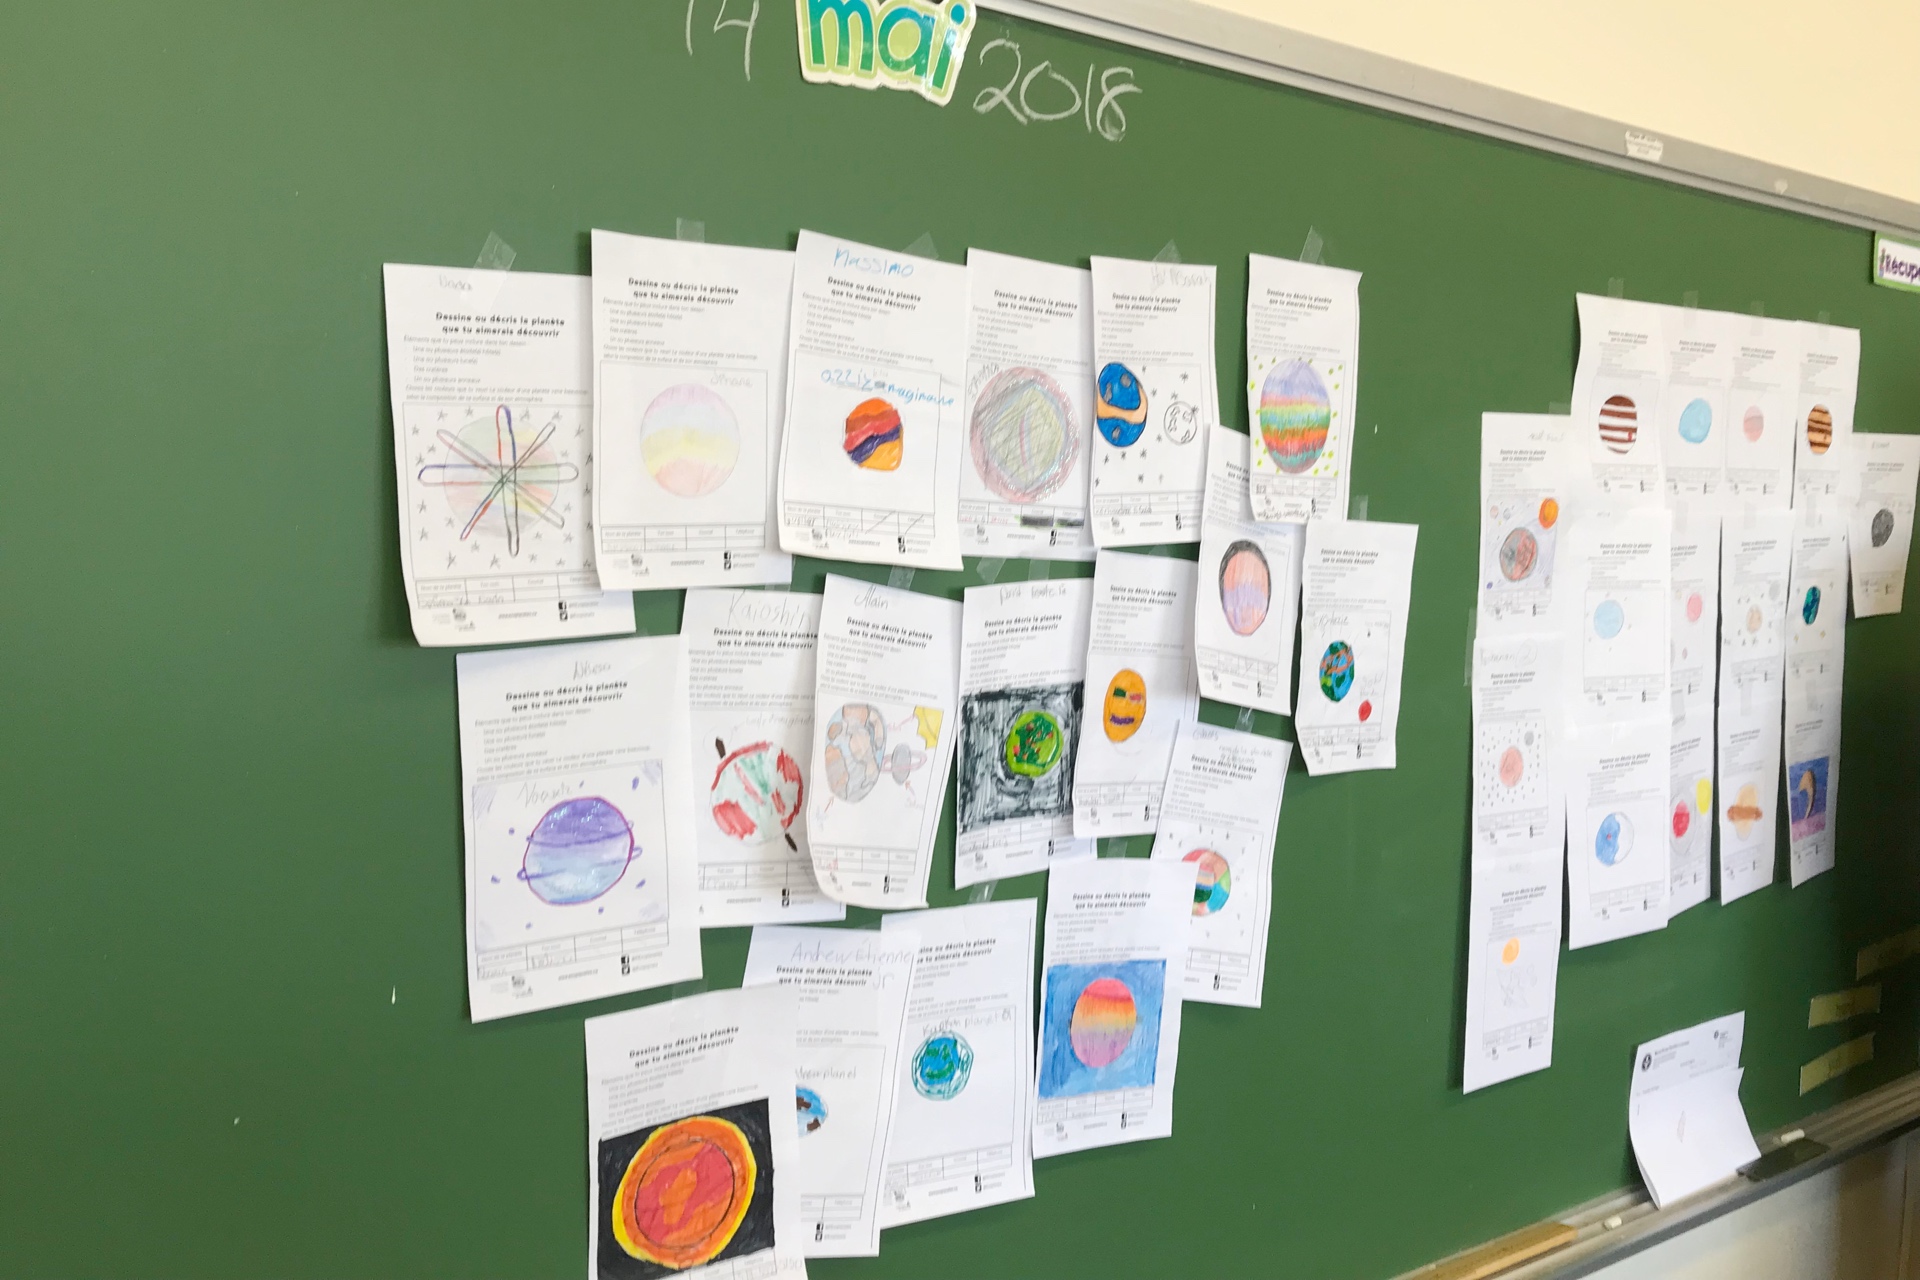 Drawings from the 2018 edition of the "Astronomer in Your Classroom" activity for the 24h of Science. (Credit: M.-E. Naud)